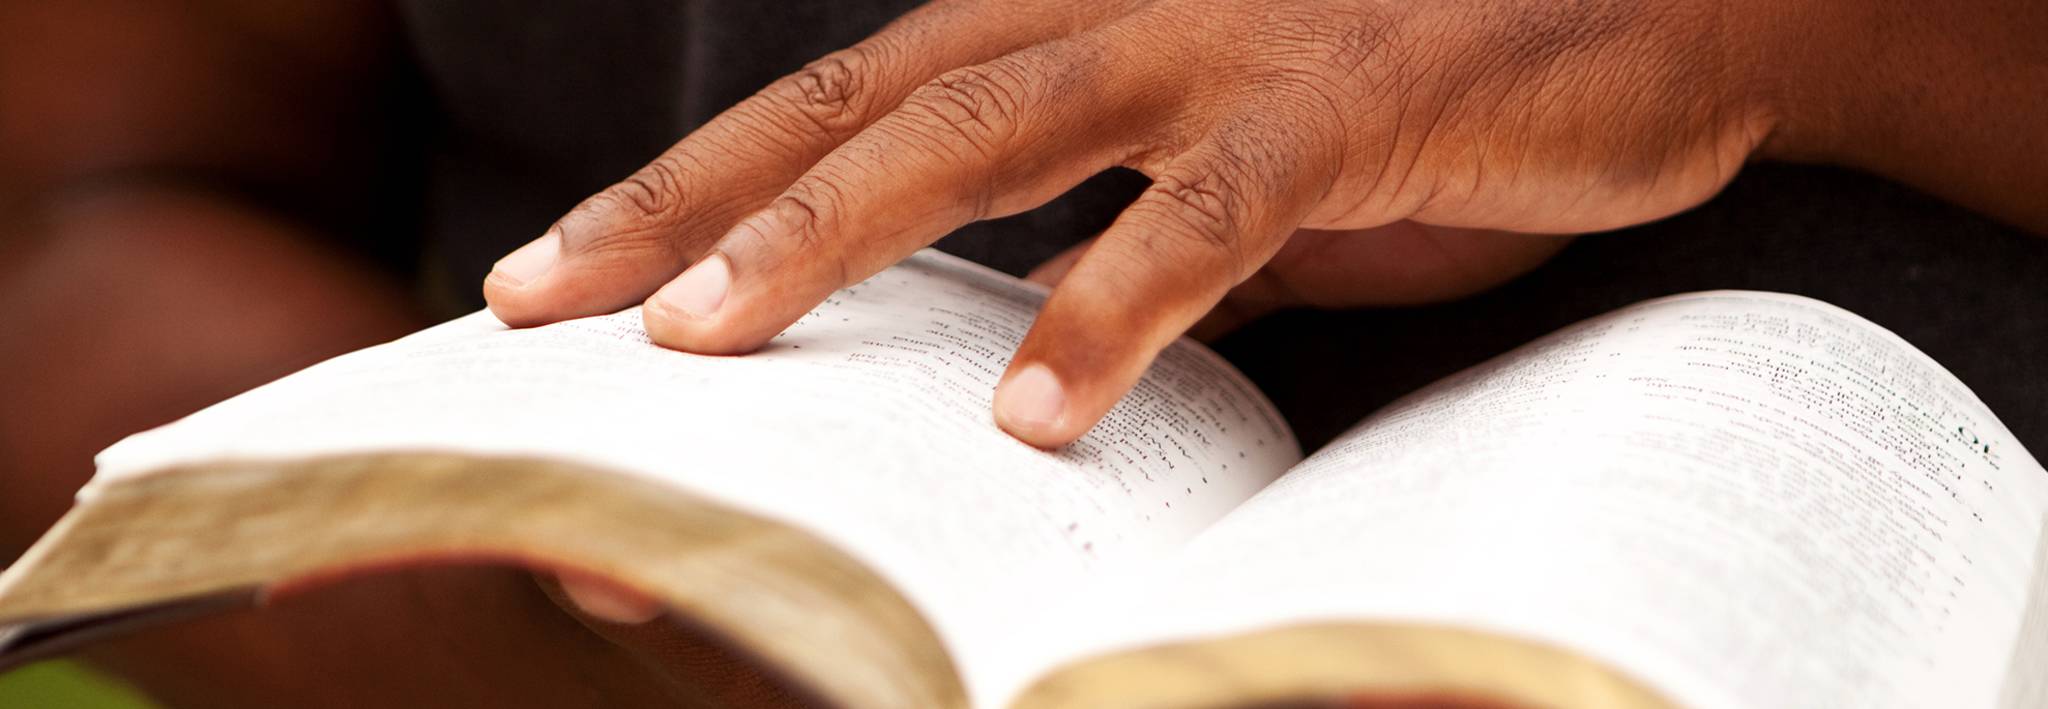 A person studying the Bible.